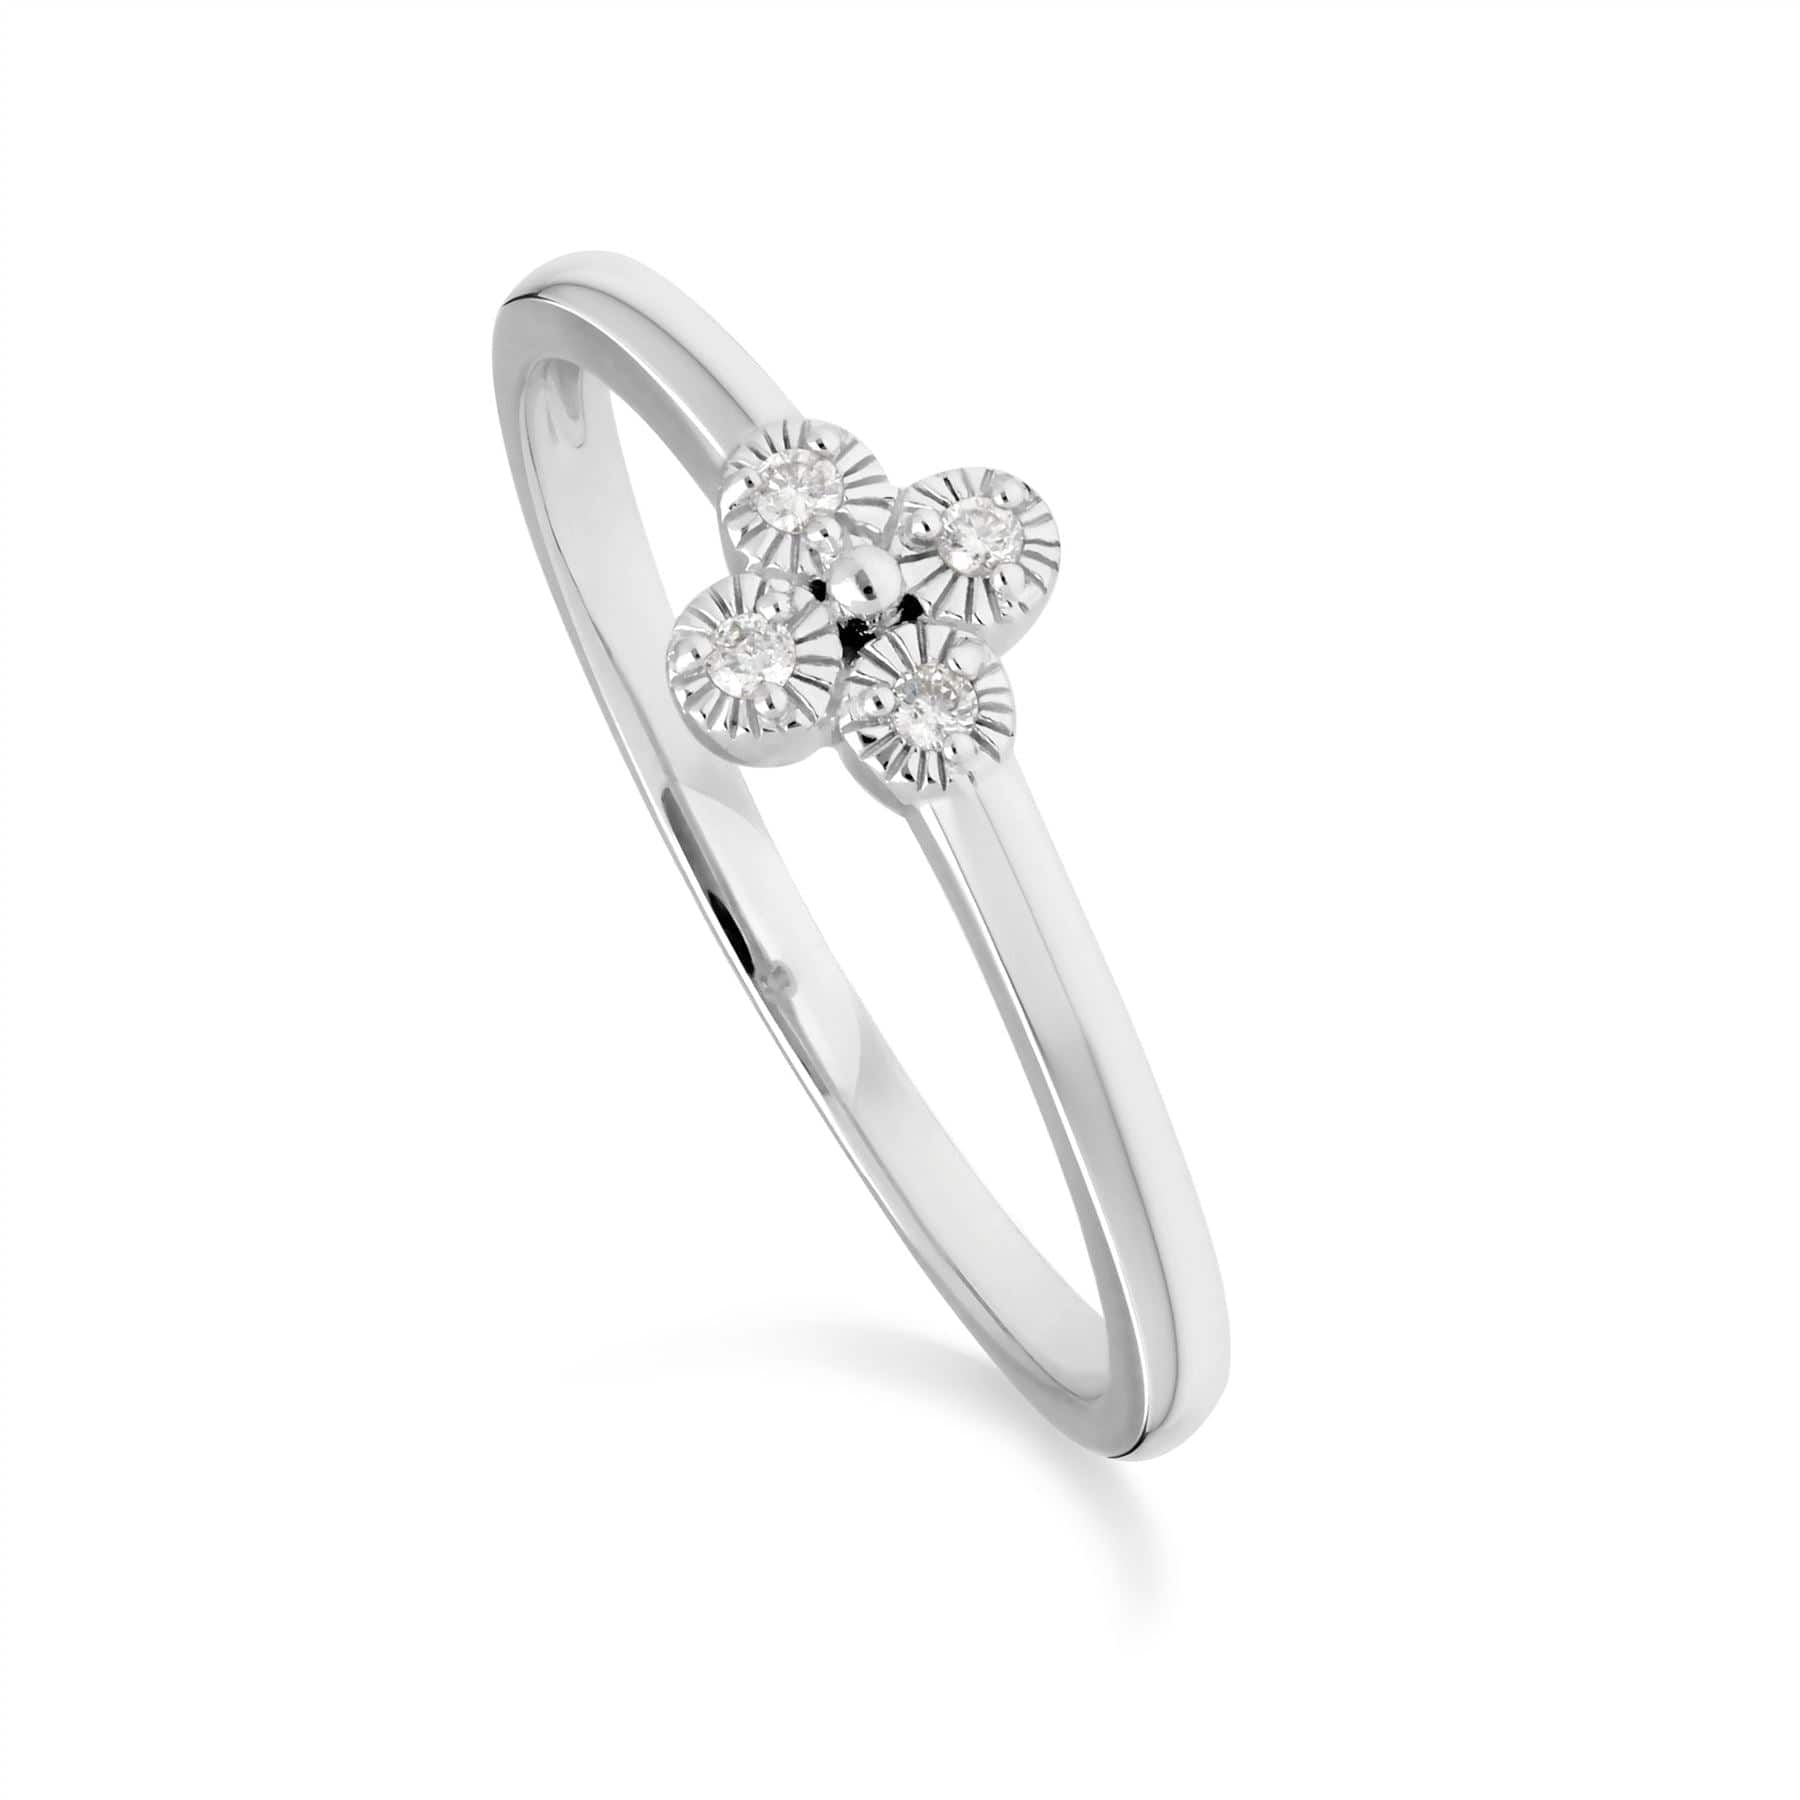 Diamond flowers ring in 9ct white gold